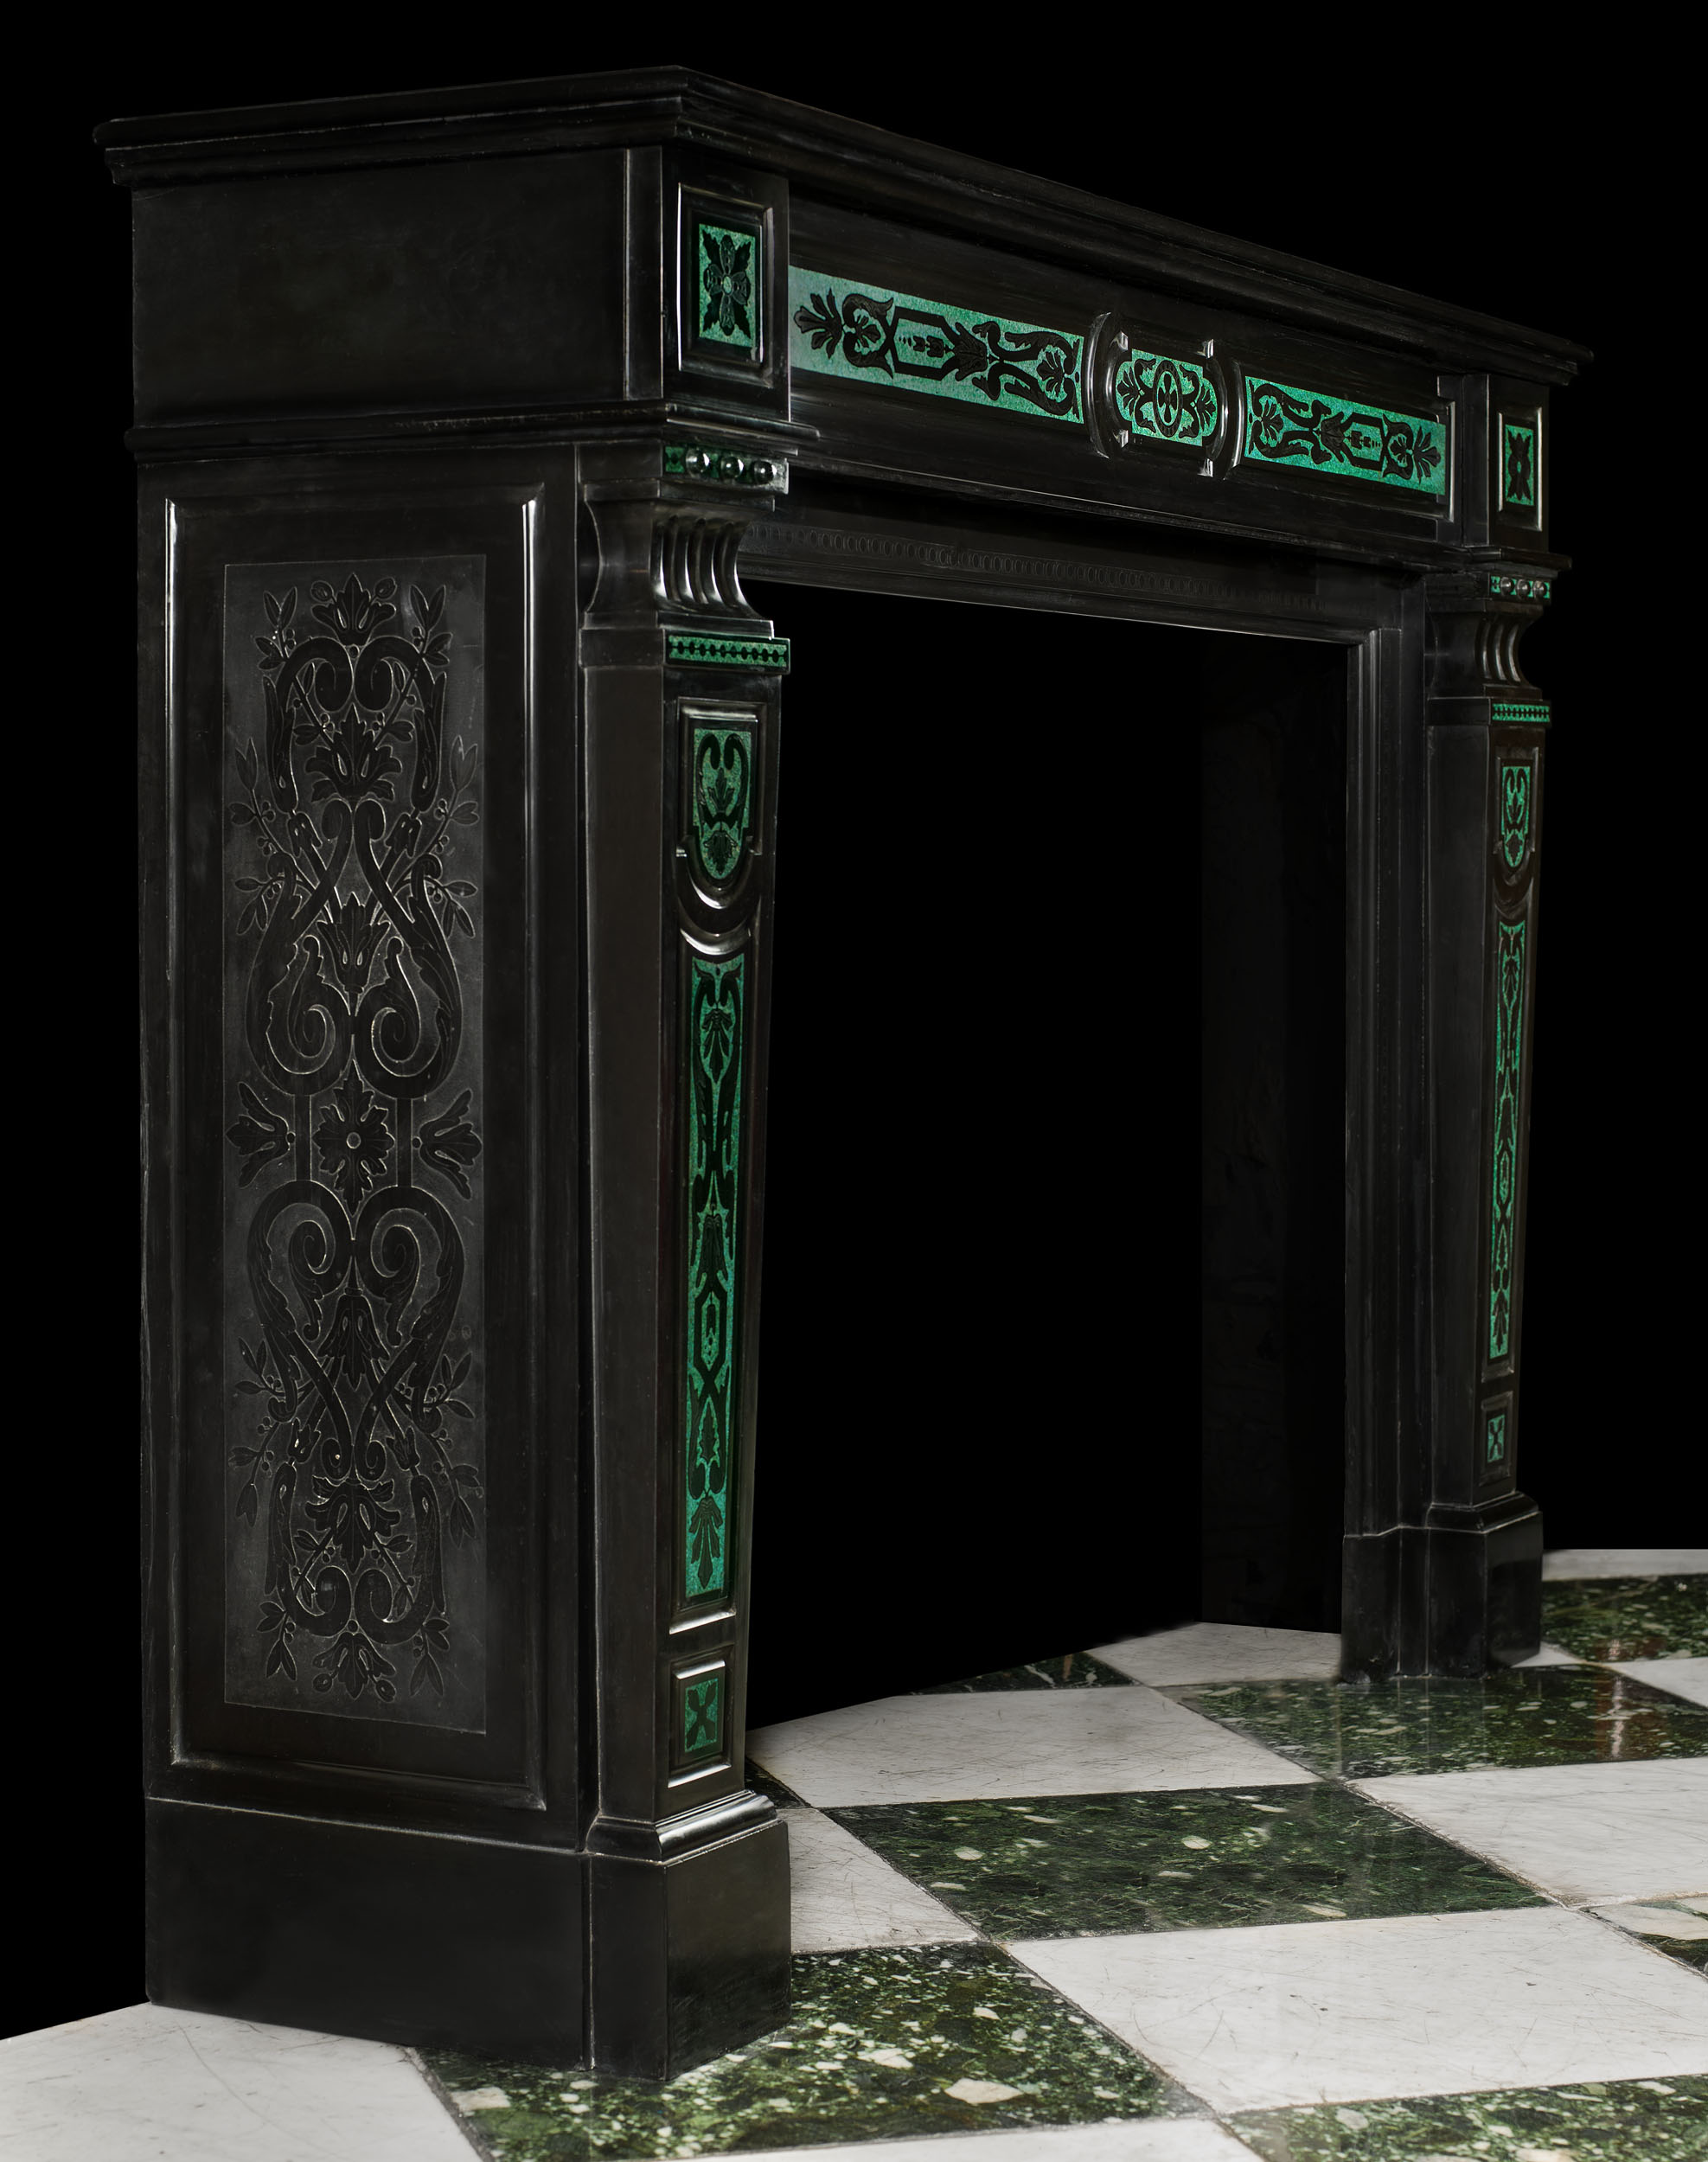 A Louis XVI style Belgian Black marble and inlaid malachite antique fireplace mantel